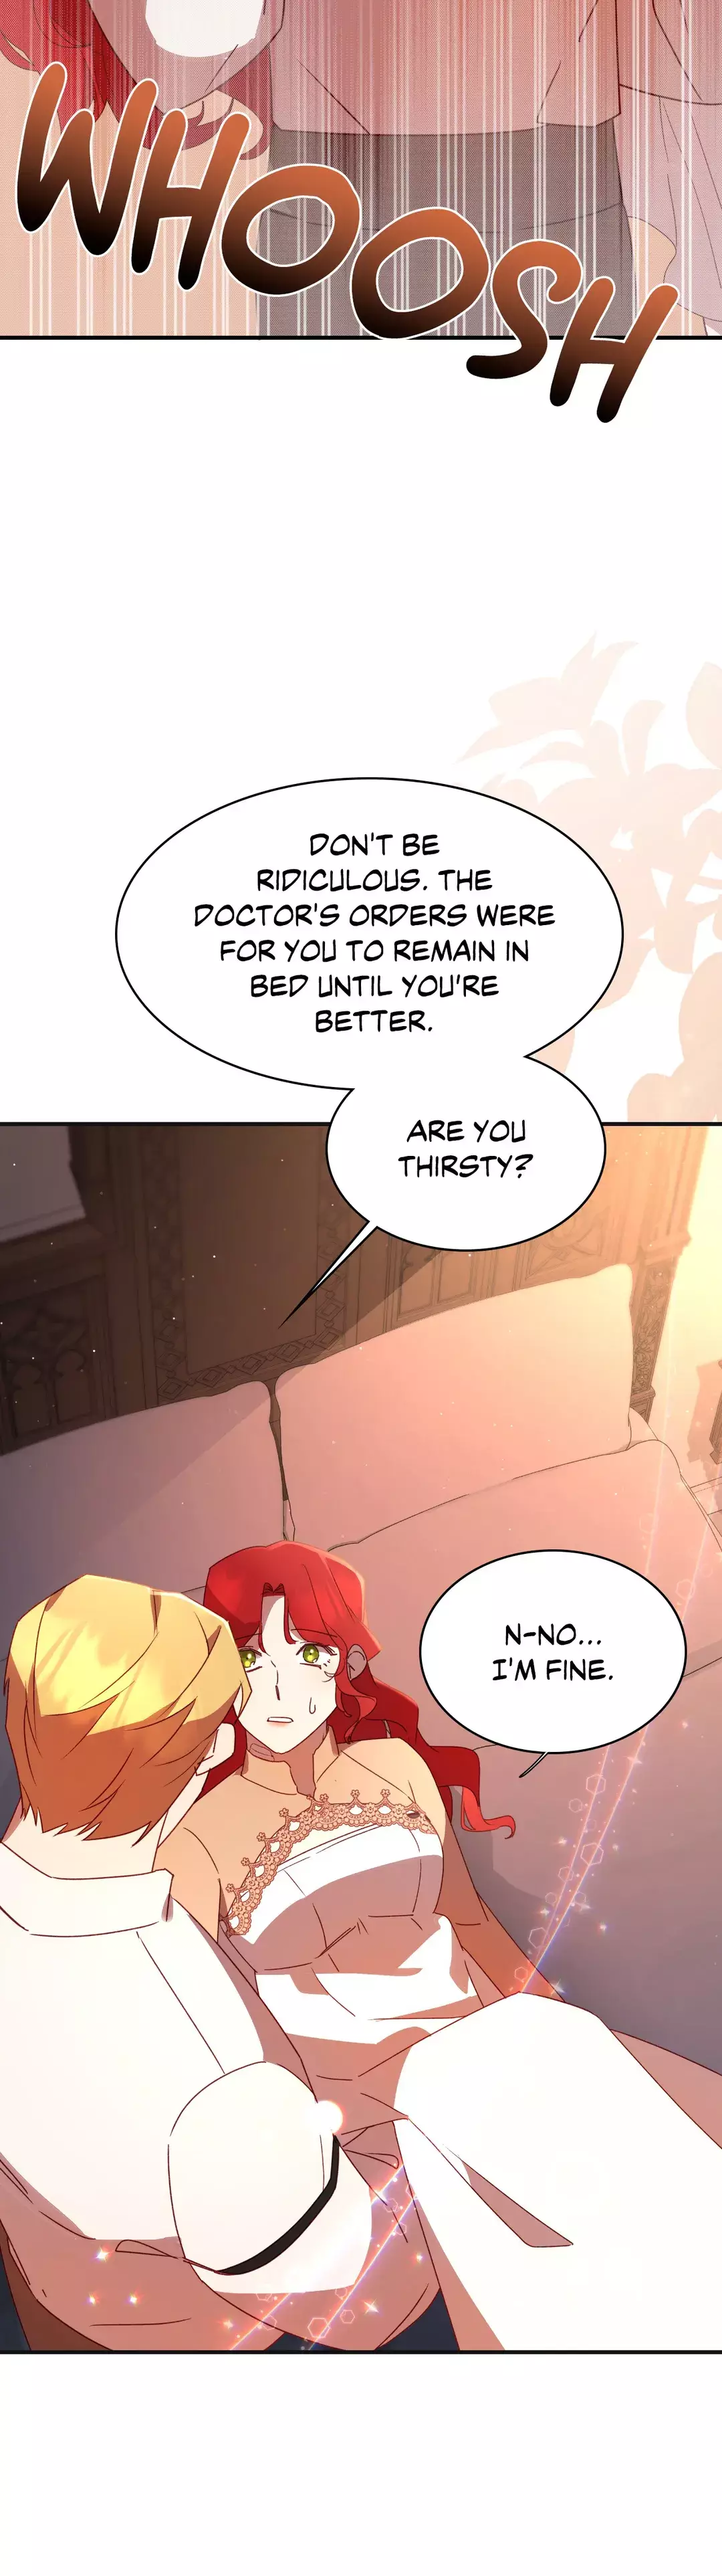 Not Knowing The Betrayal Of That Day - 13 page 10-172fea40